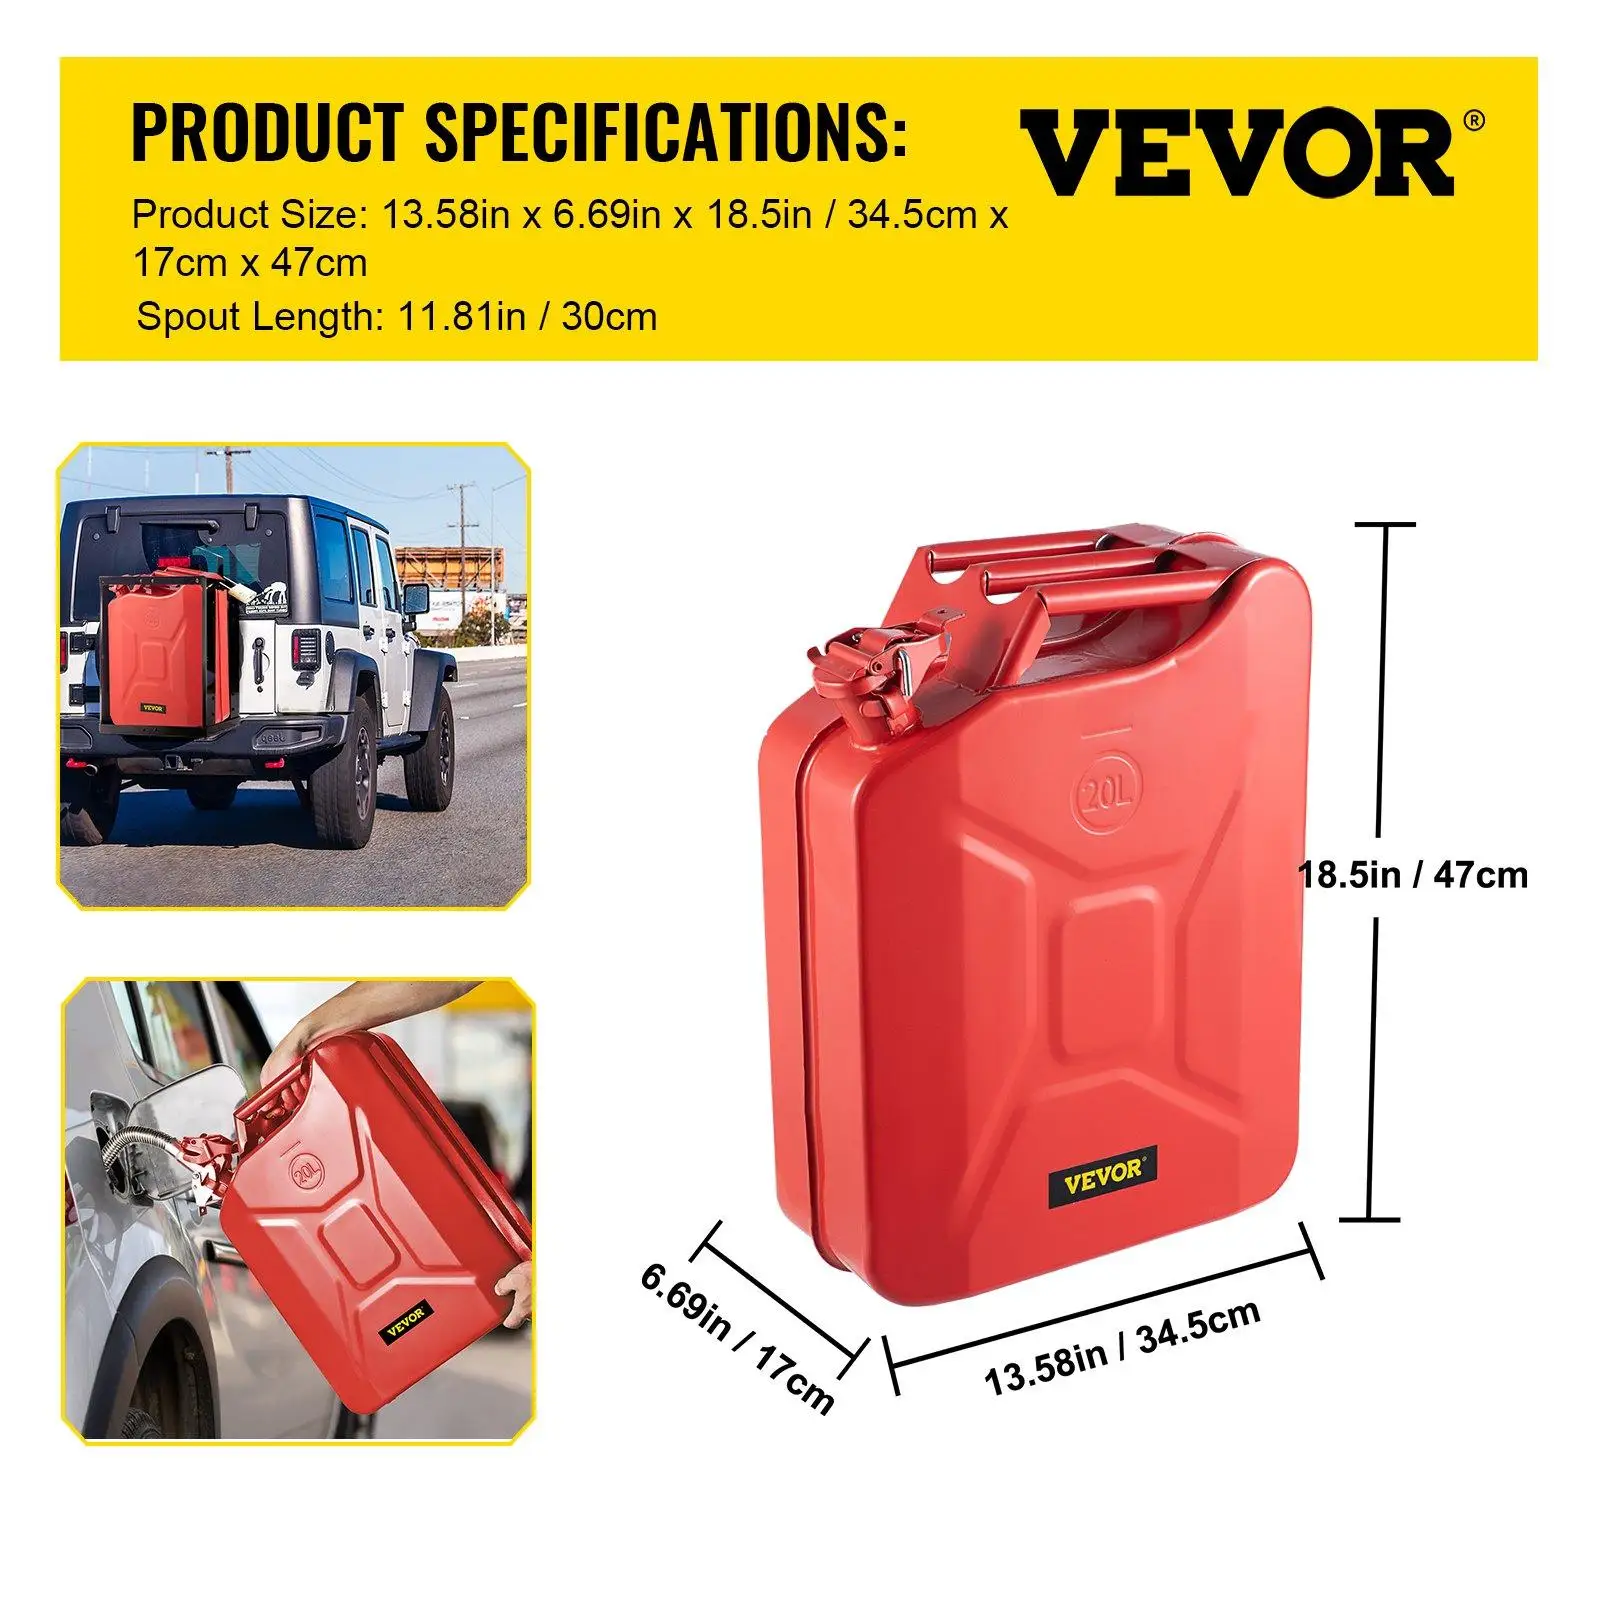 VEVOR jerry fuel can size